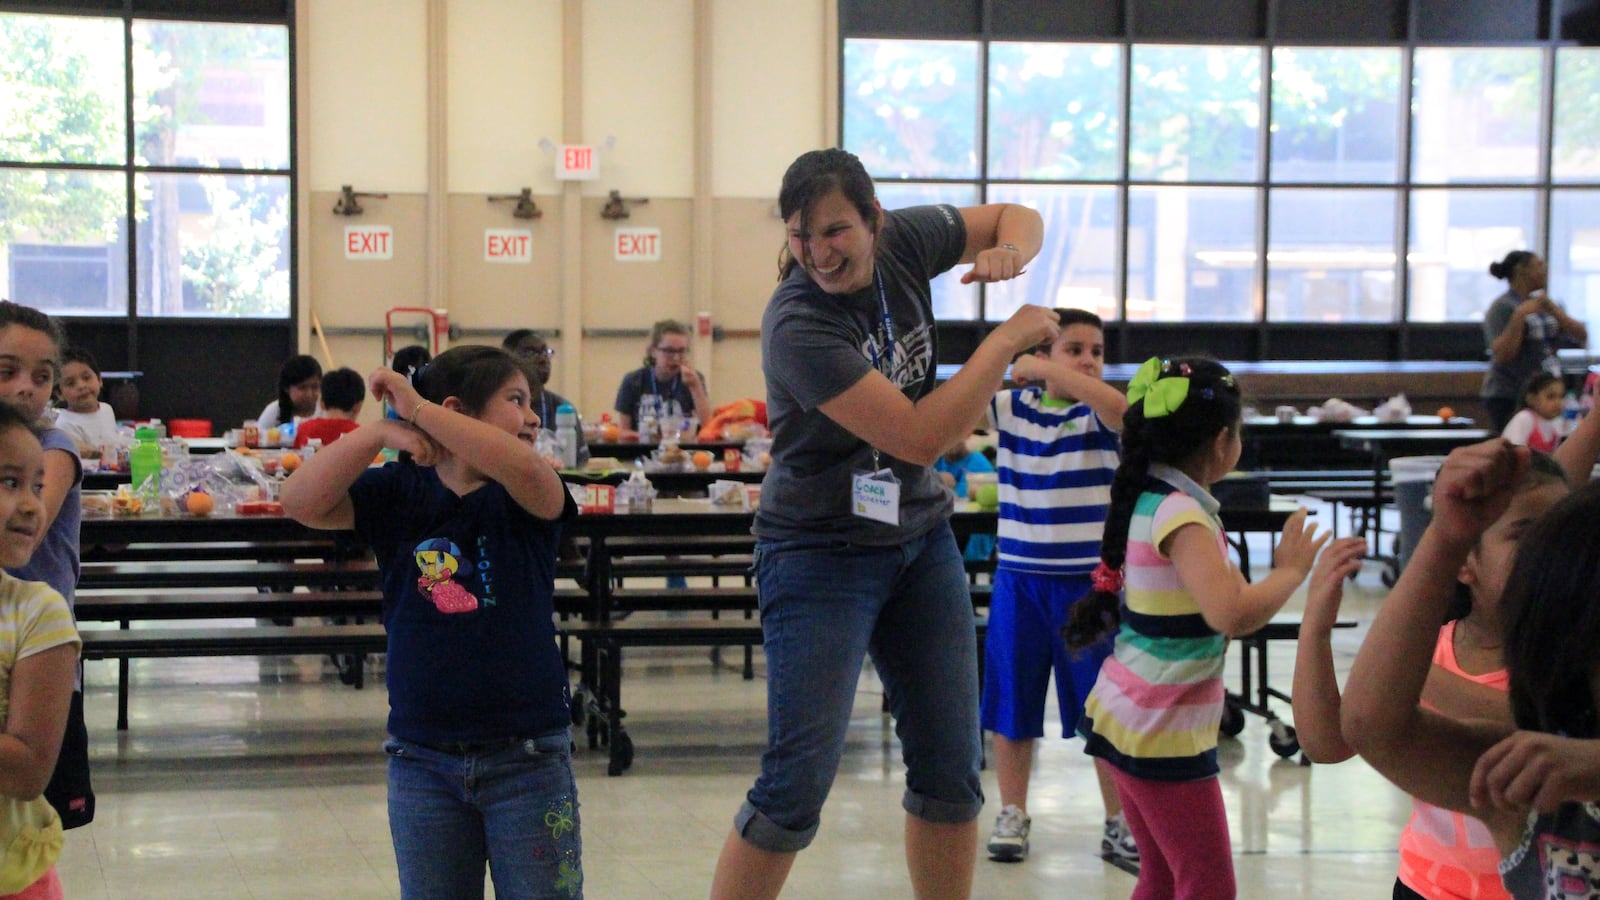 Students and teachers dance together after lunch at a Memphis Teacher Residency Camp held this summer at Kingsbury Elementary School.